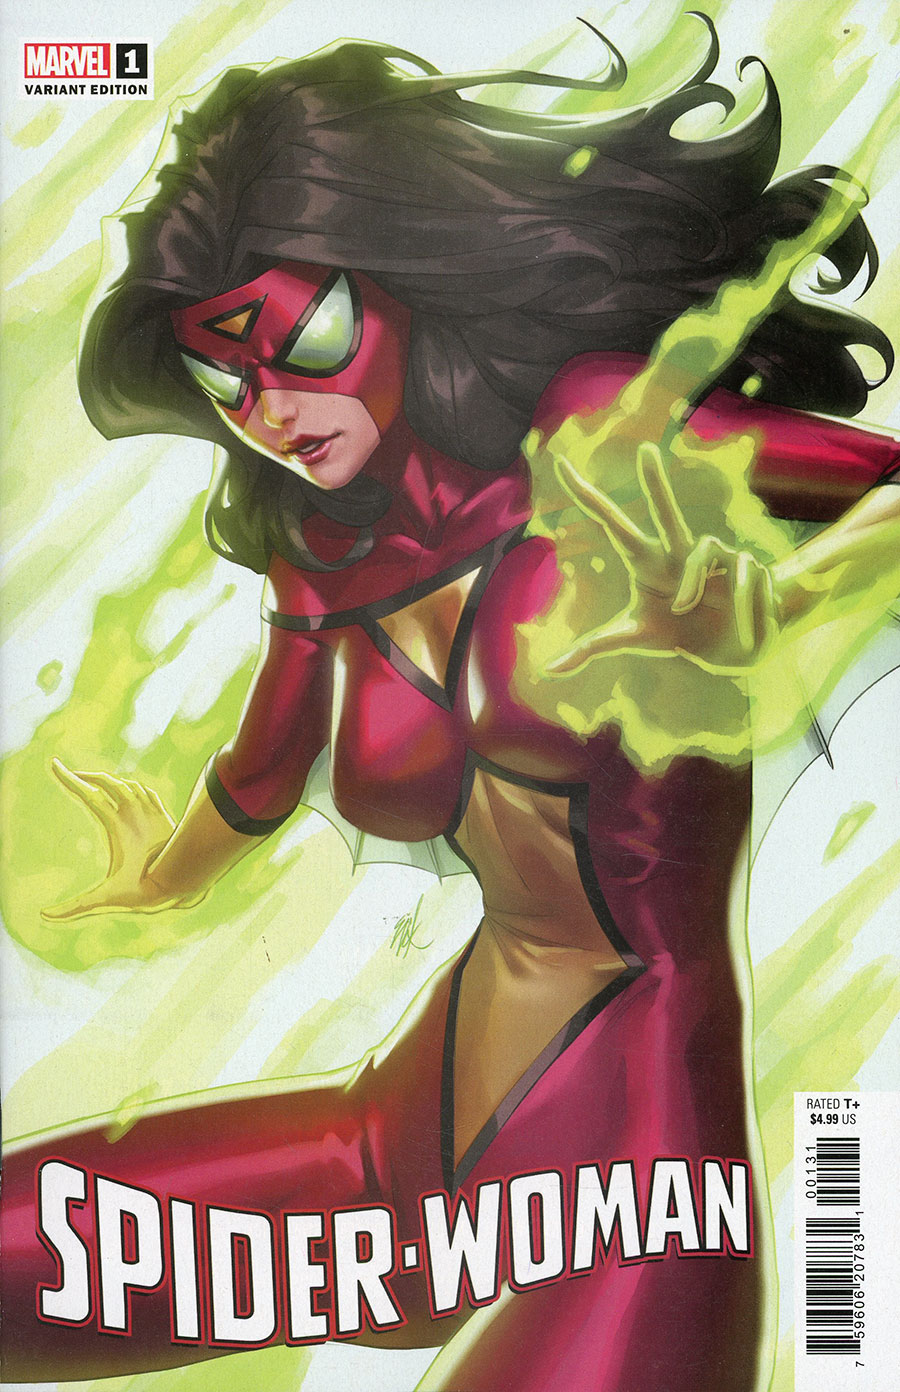 Spider-Woman Vol 8 #1 Cover C Variant Ejikure Spider-Woman Cover (Gang War First Strike Tie-In)